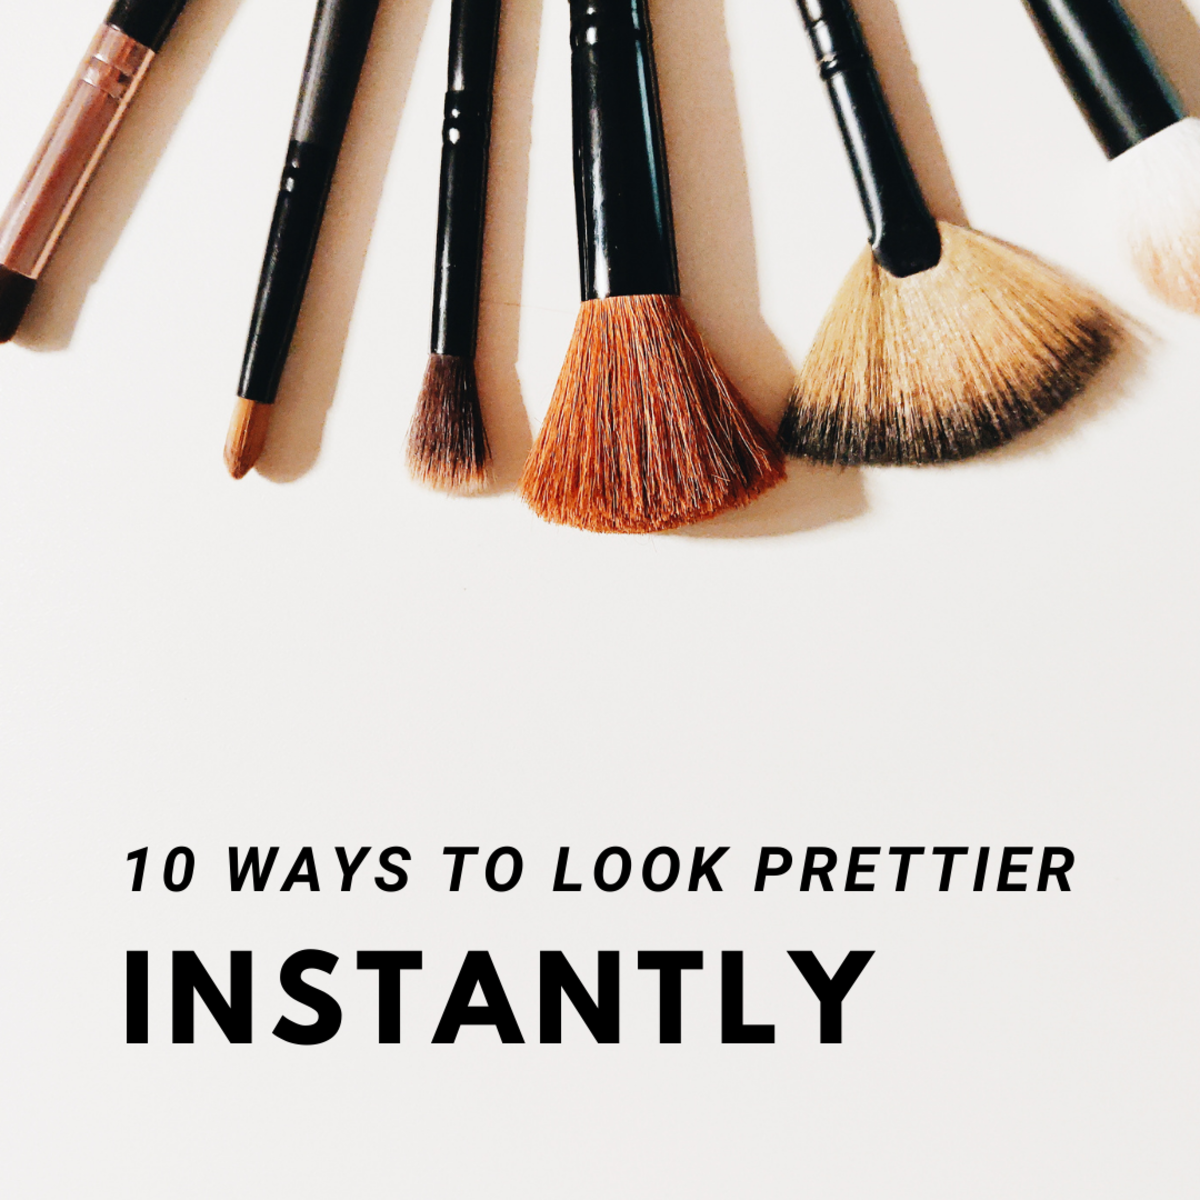 Read on for 10 tips that will help you look and feel your best! 